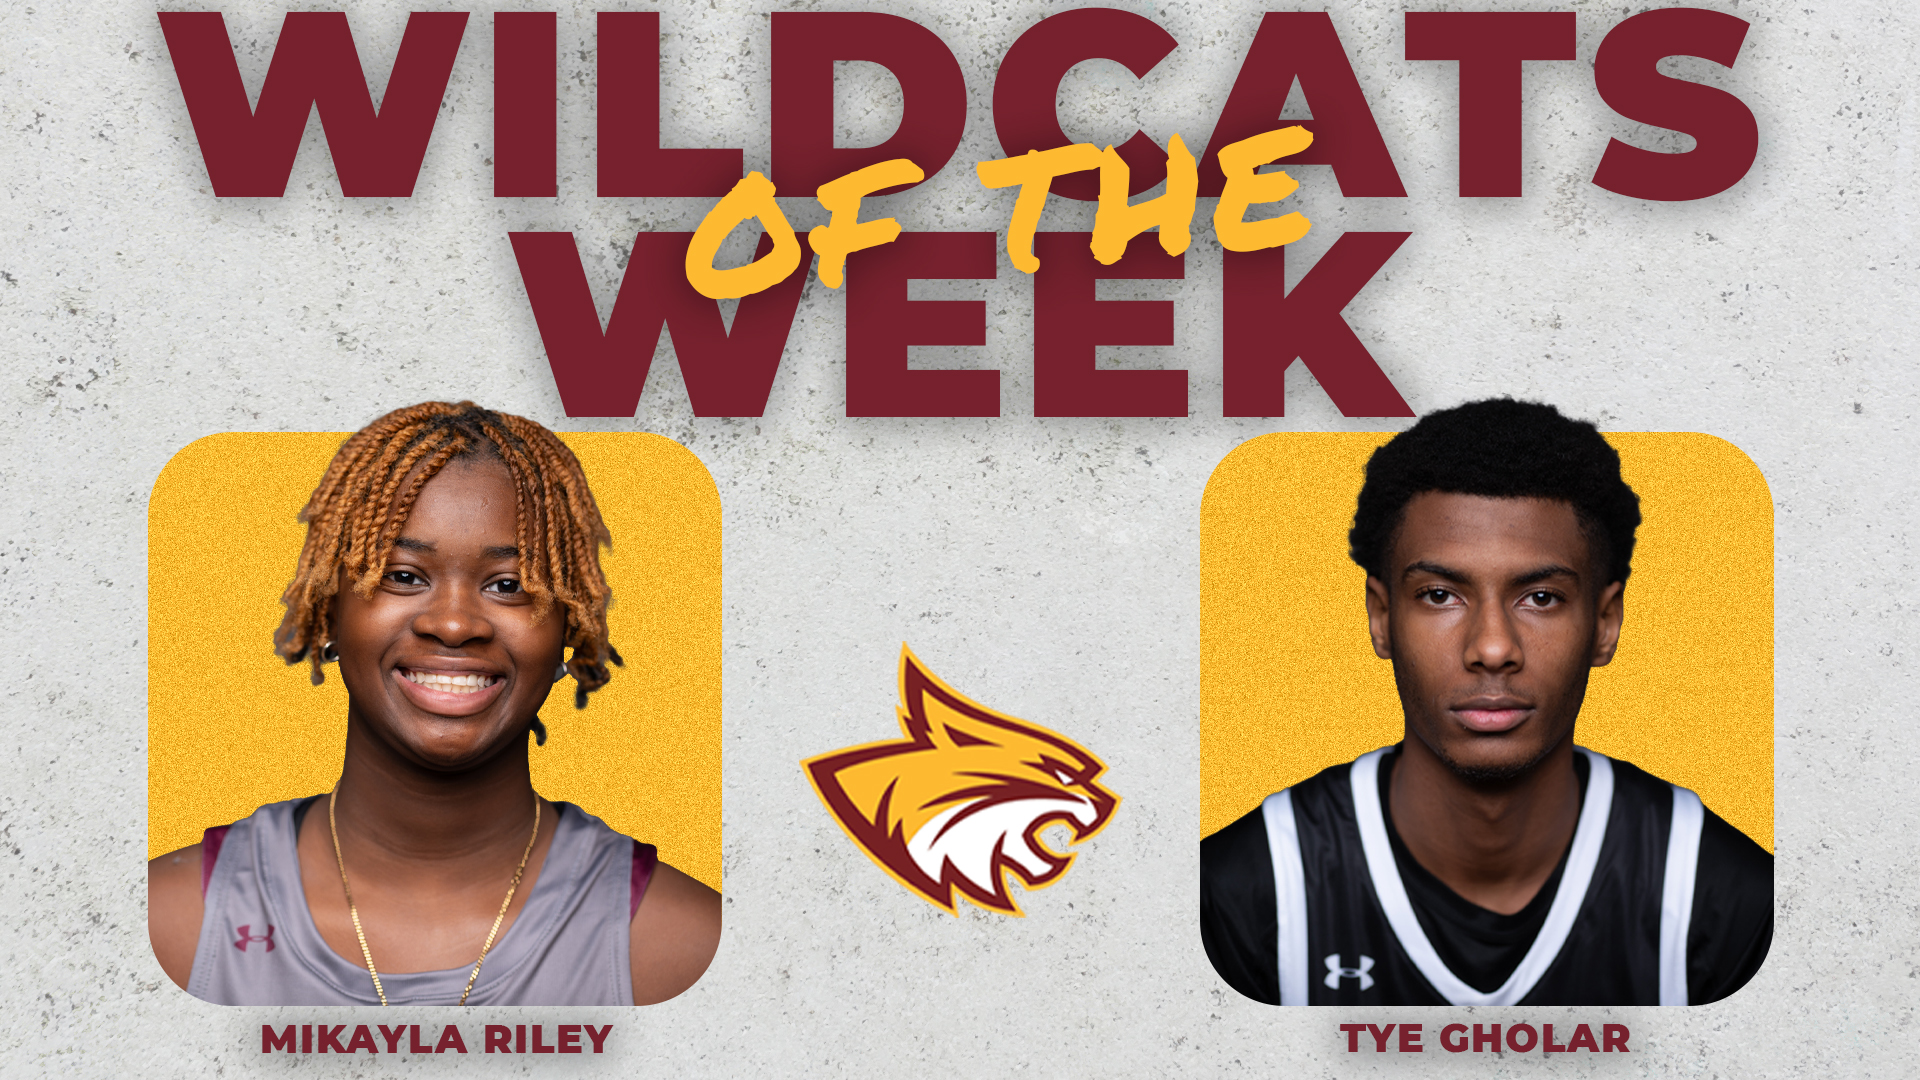 Mikayla Riley, Tye Gholar named Wildcats of the Week